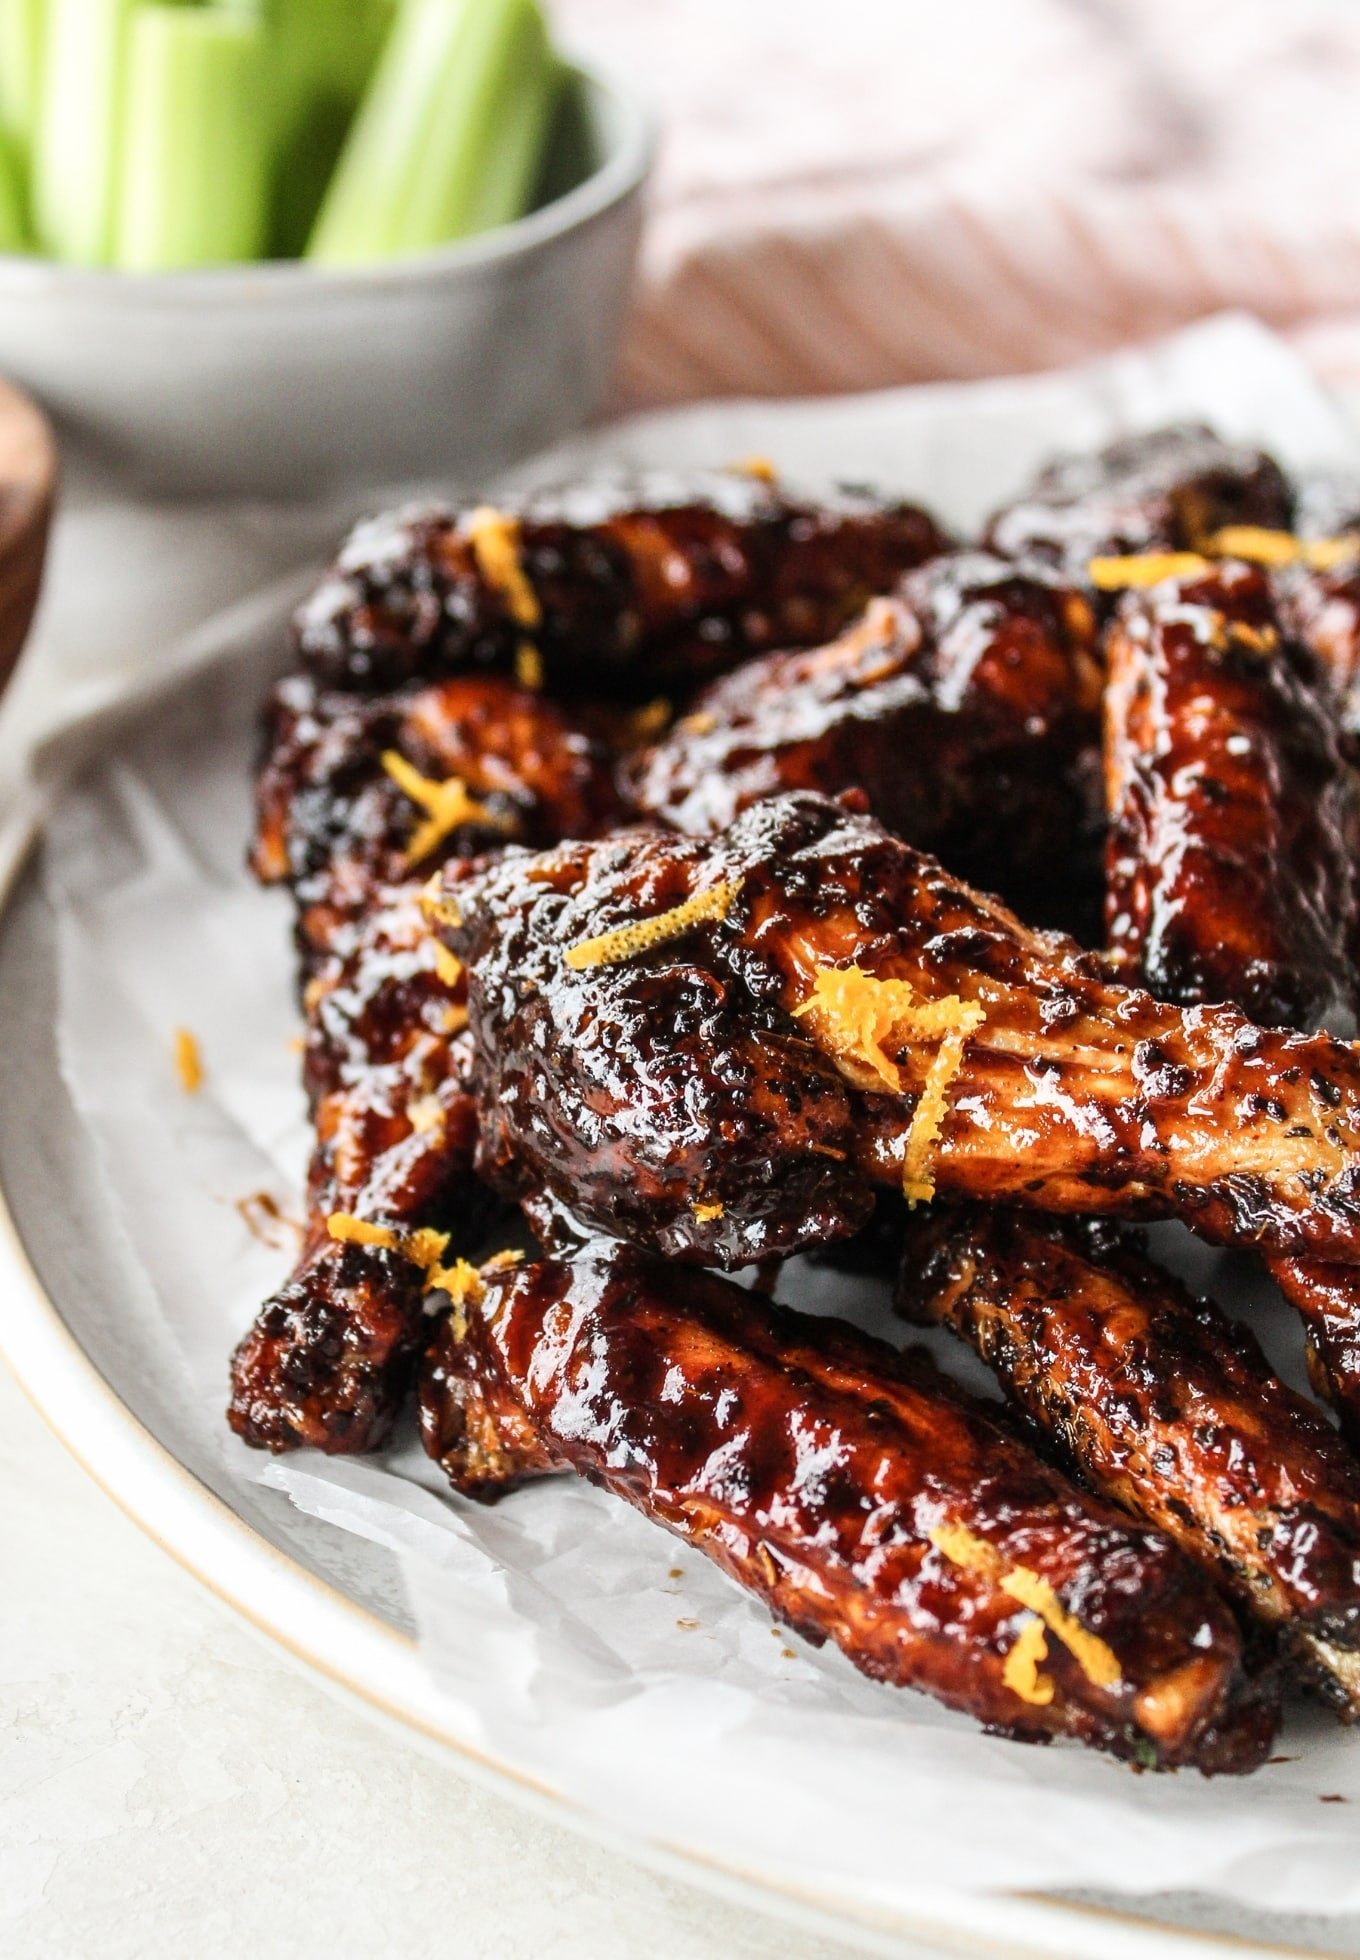 https://thewholecook.com/wp-content/uploads/2021/02/Sticky-Orange-Balsamic-Chicken-Wings-by-The-Whole-Cook-vertical1-2.jpg